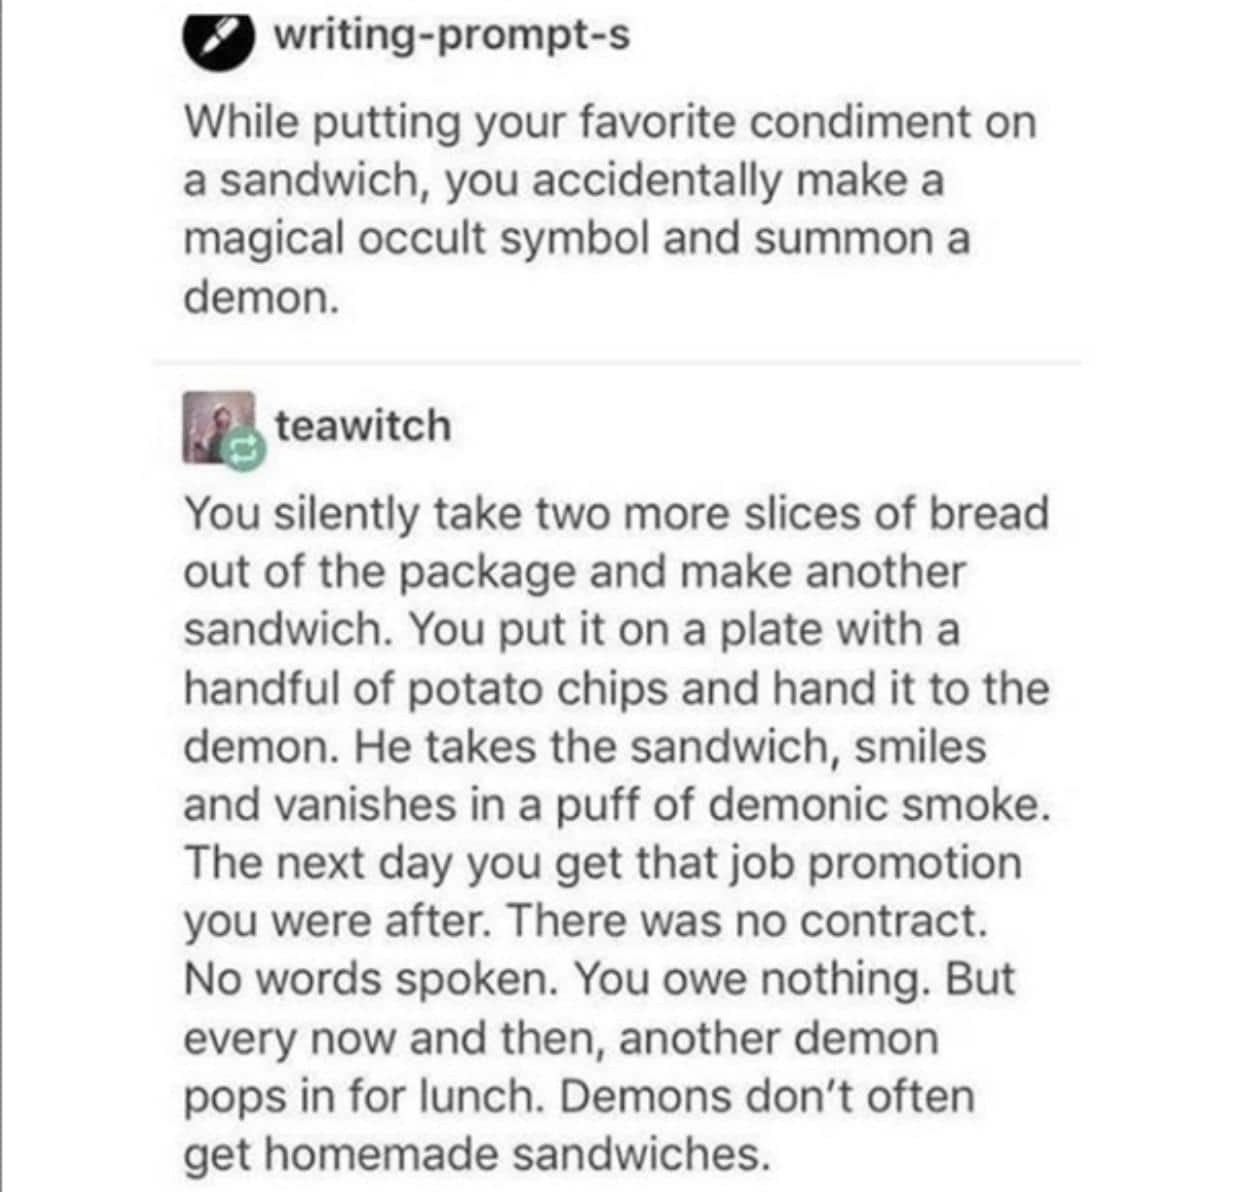 Wholesome memes, Oddly Wholesome Memes Wholesome memes, Oddly text: writing-prompt-s While putting your favorite condiment on a sandwich, you accidentally make a magical occult symbol and summon a demon. teawitch You silently take two more slices of bread out of the package and make another sandwich. You put it on a plate with a handful of potato chips and hand it to the demon. He takes the sandwich, smiles and vanishes in a puff of demonic smoke. The next day you get that job promotion you were after. There was no contract. No words spoken. You owe nothing. But every now and then, another demon pops in for lunch. Demons don't often get homemade sandwiches. 